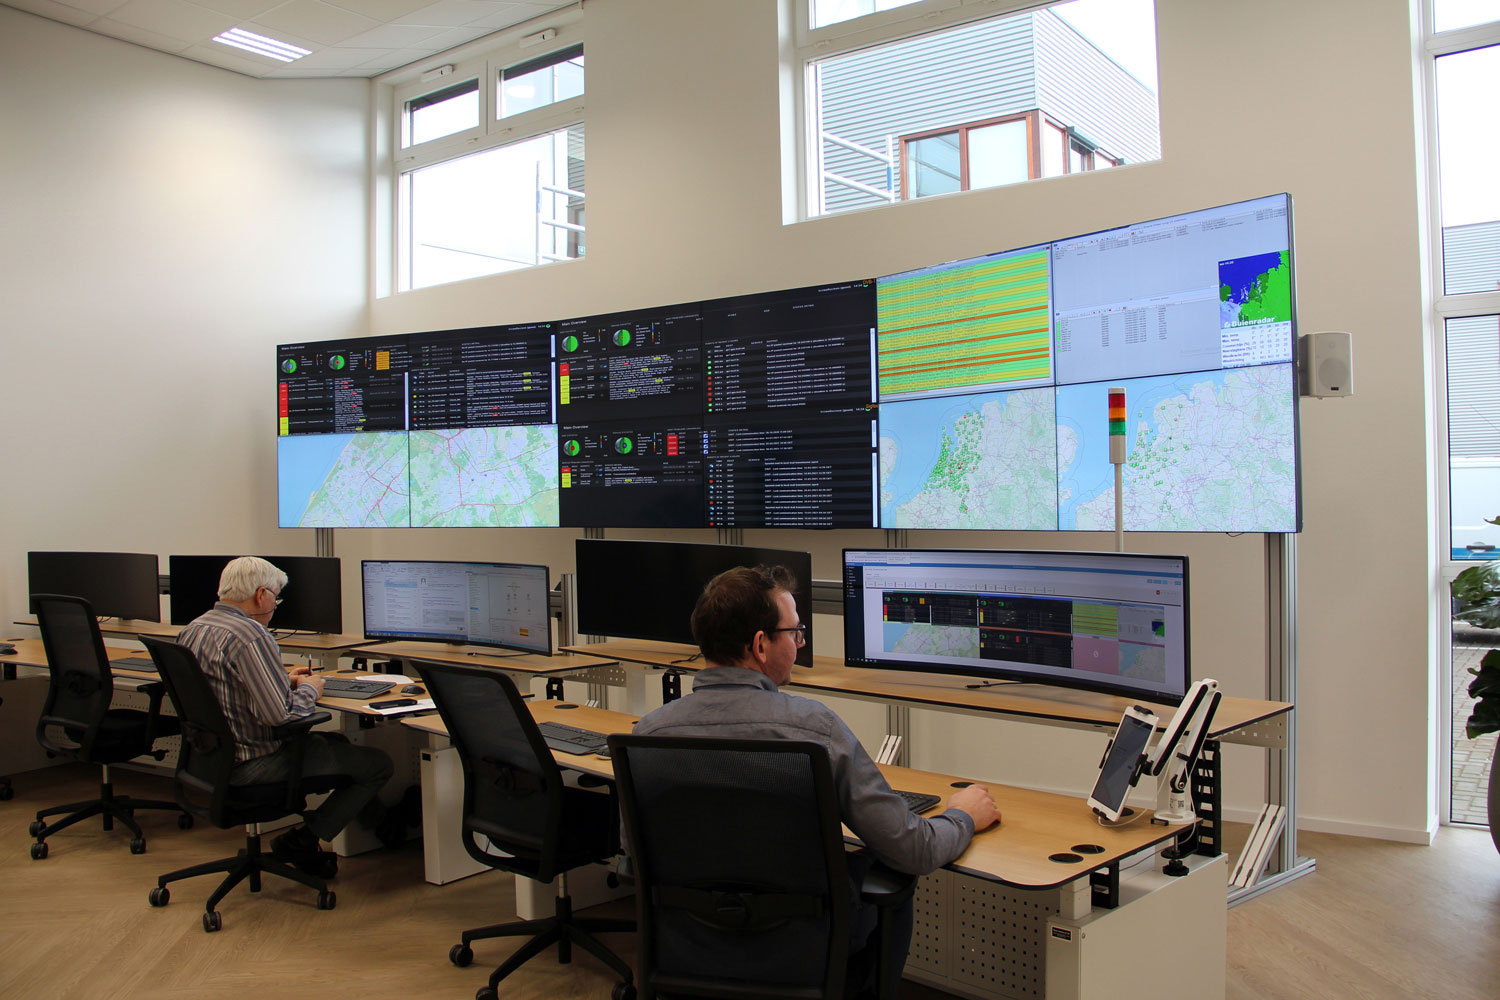  Matrox video wall technology and VView software in its Network Operations Center (NOC).